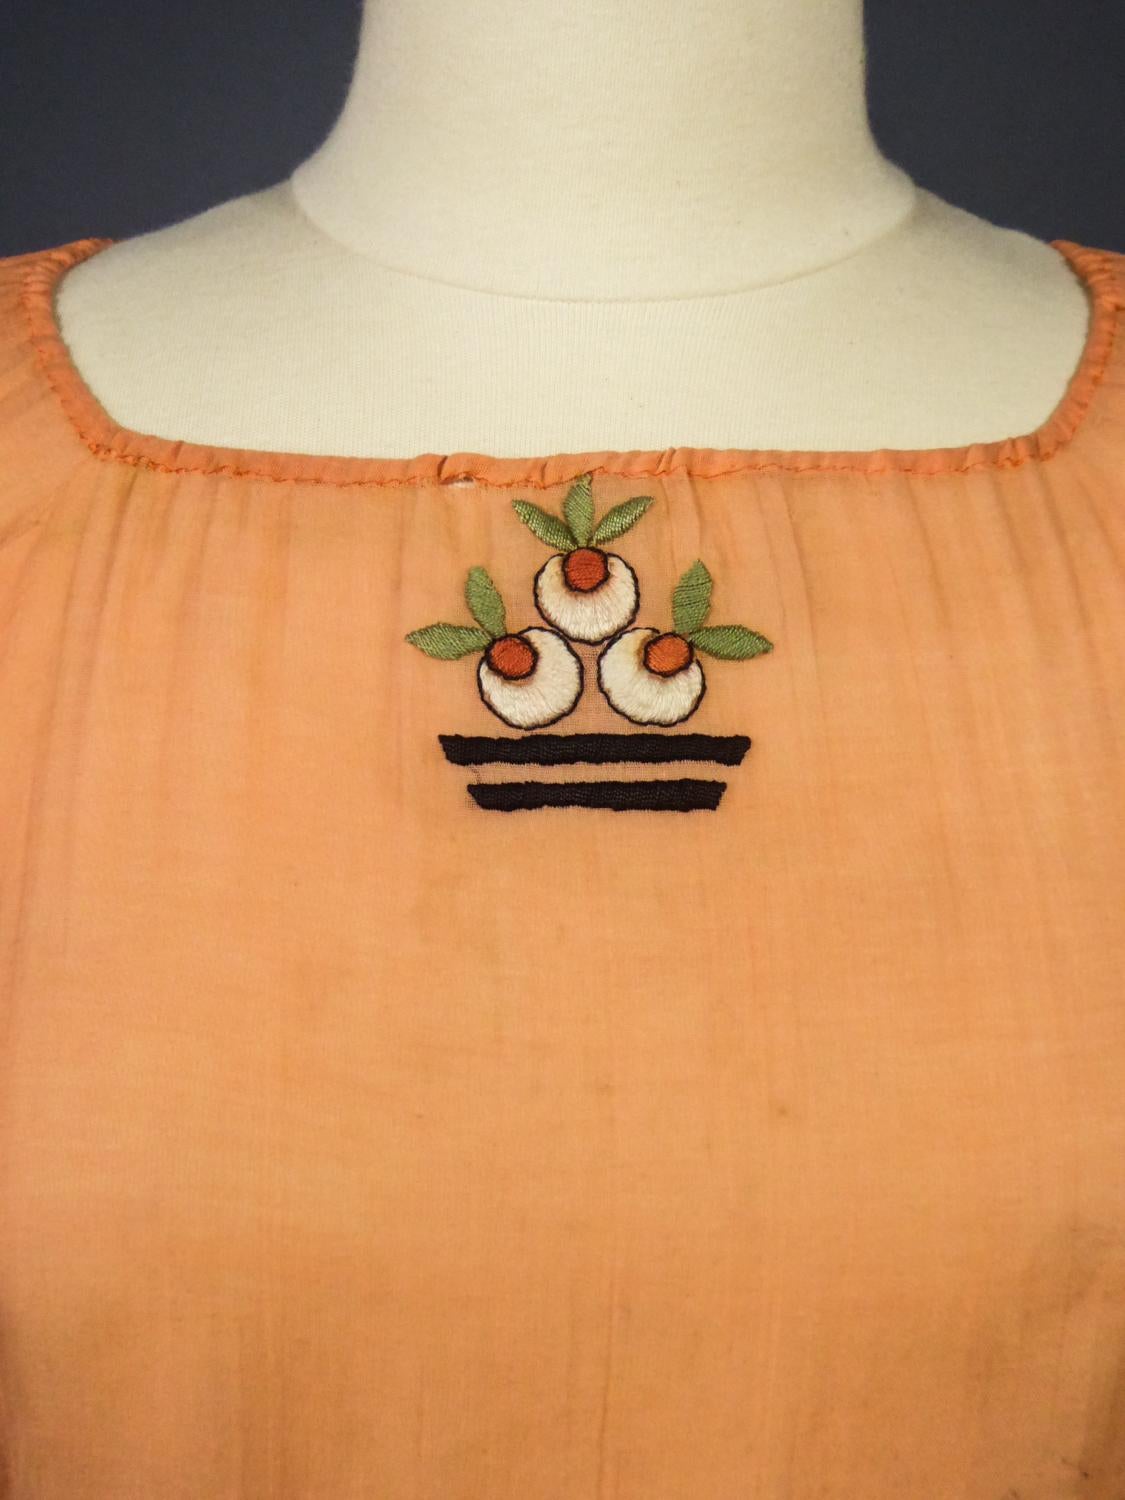 Women's A Seaside Embroidered Cotton Dress in the style of Atelier Martine Circa 1920 For Sale